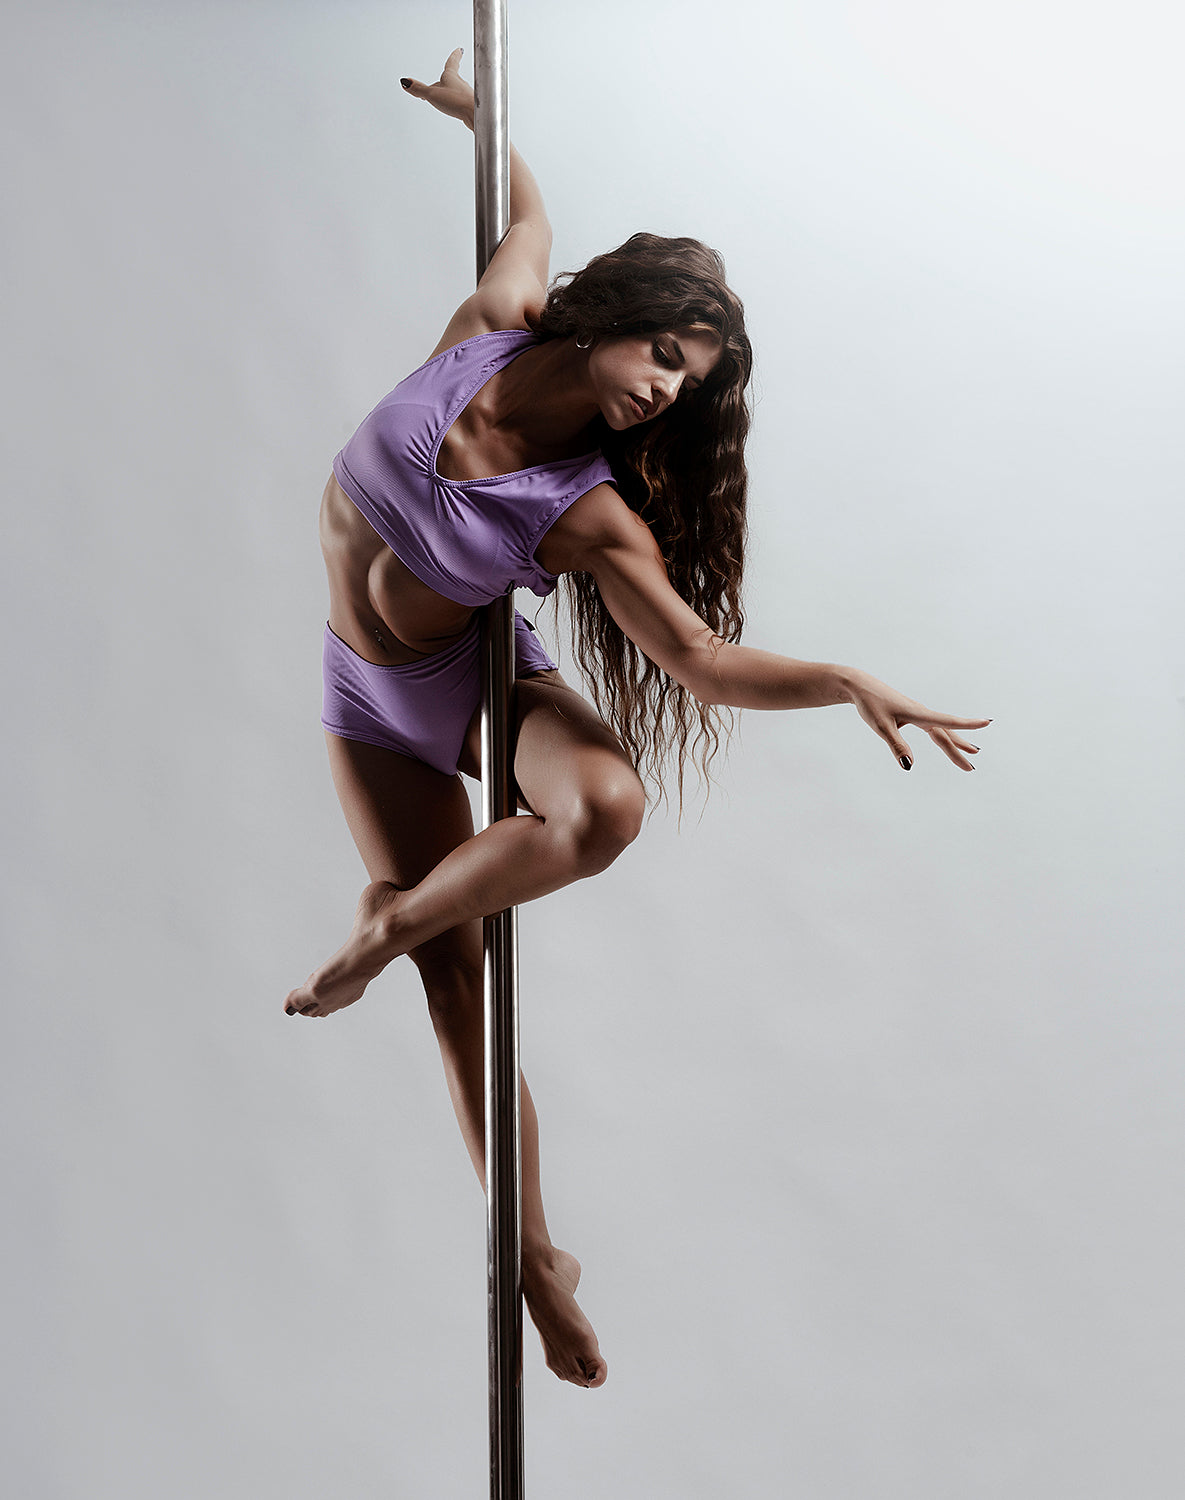 What to wear to pole dancing